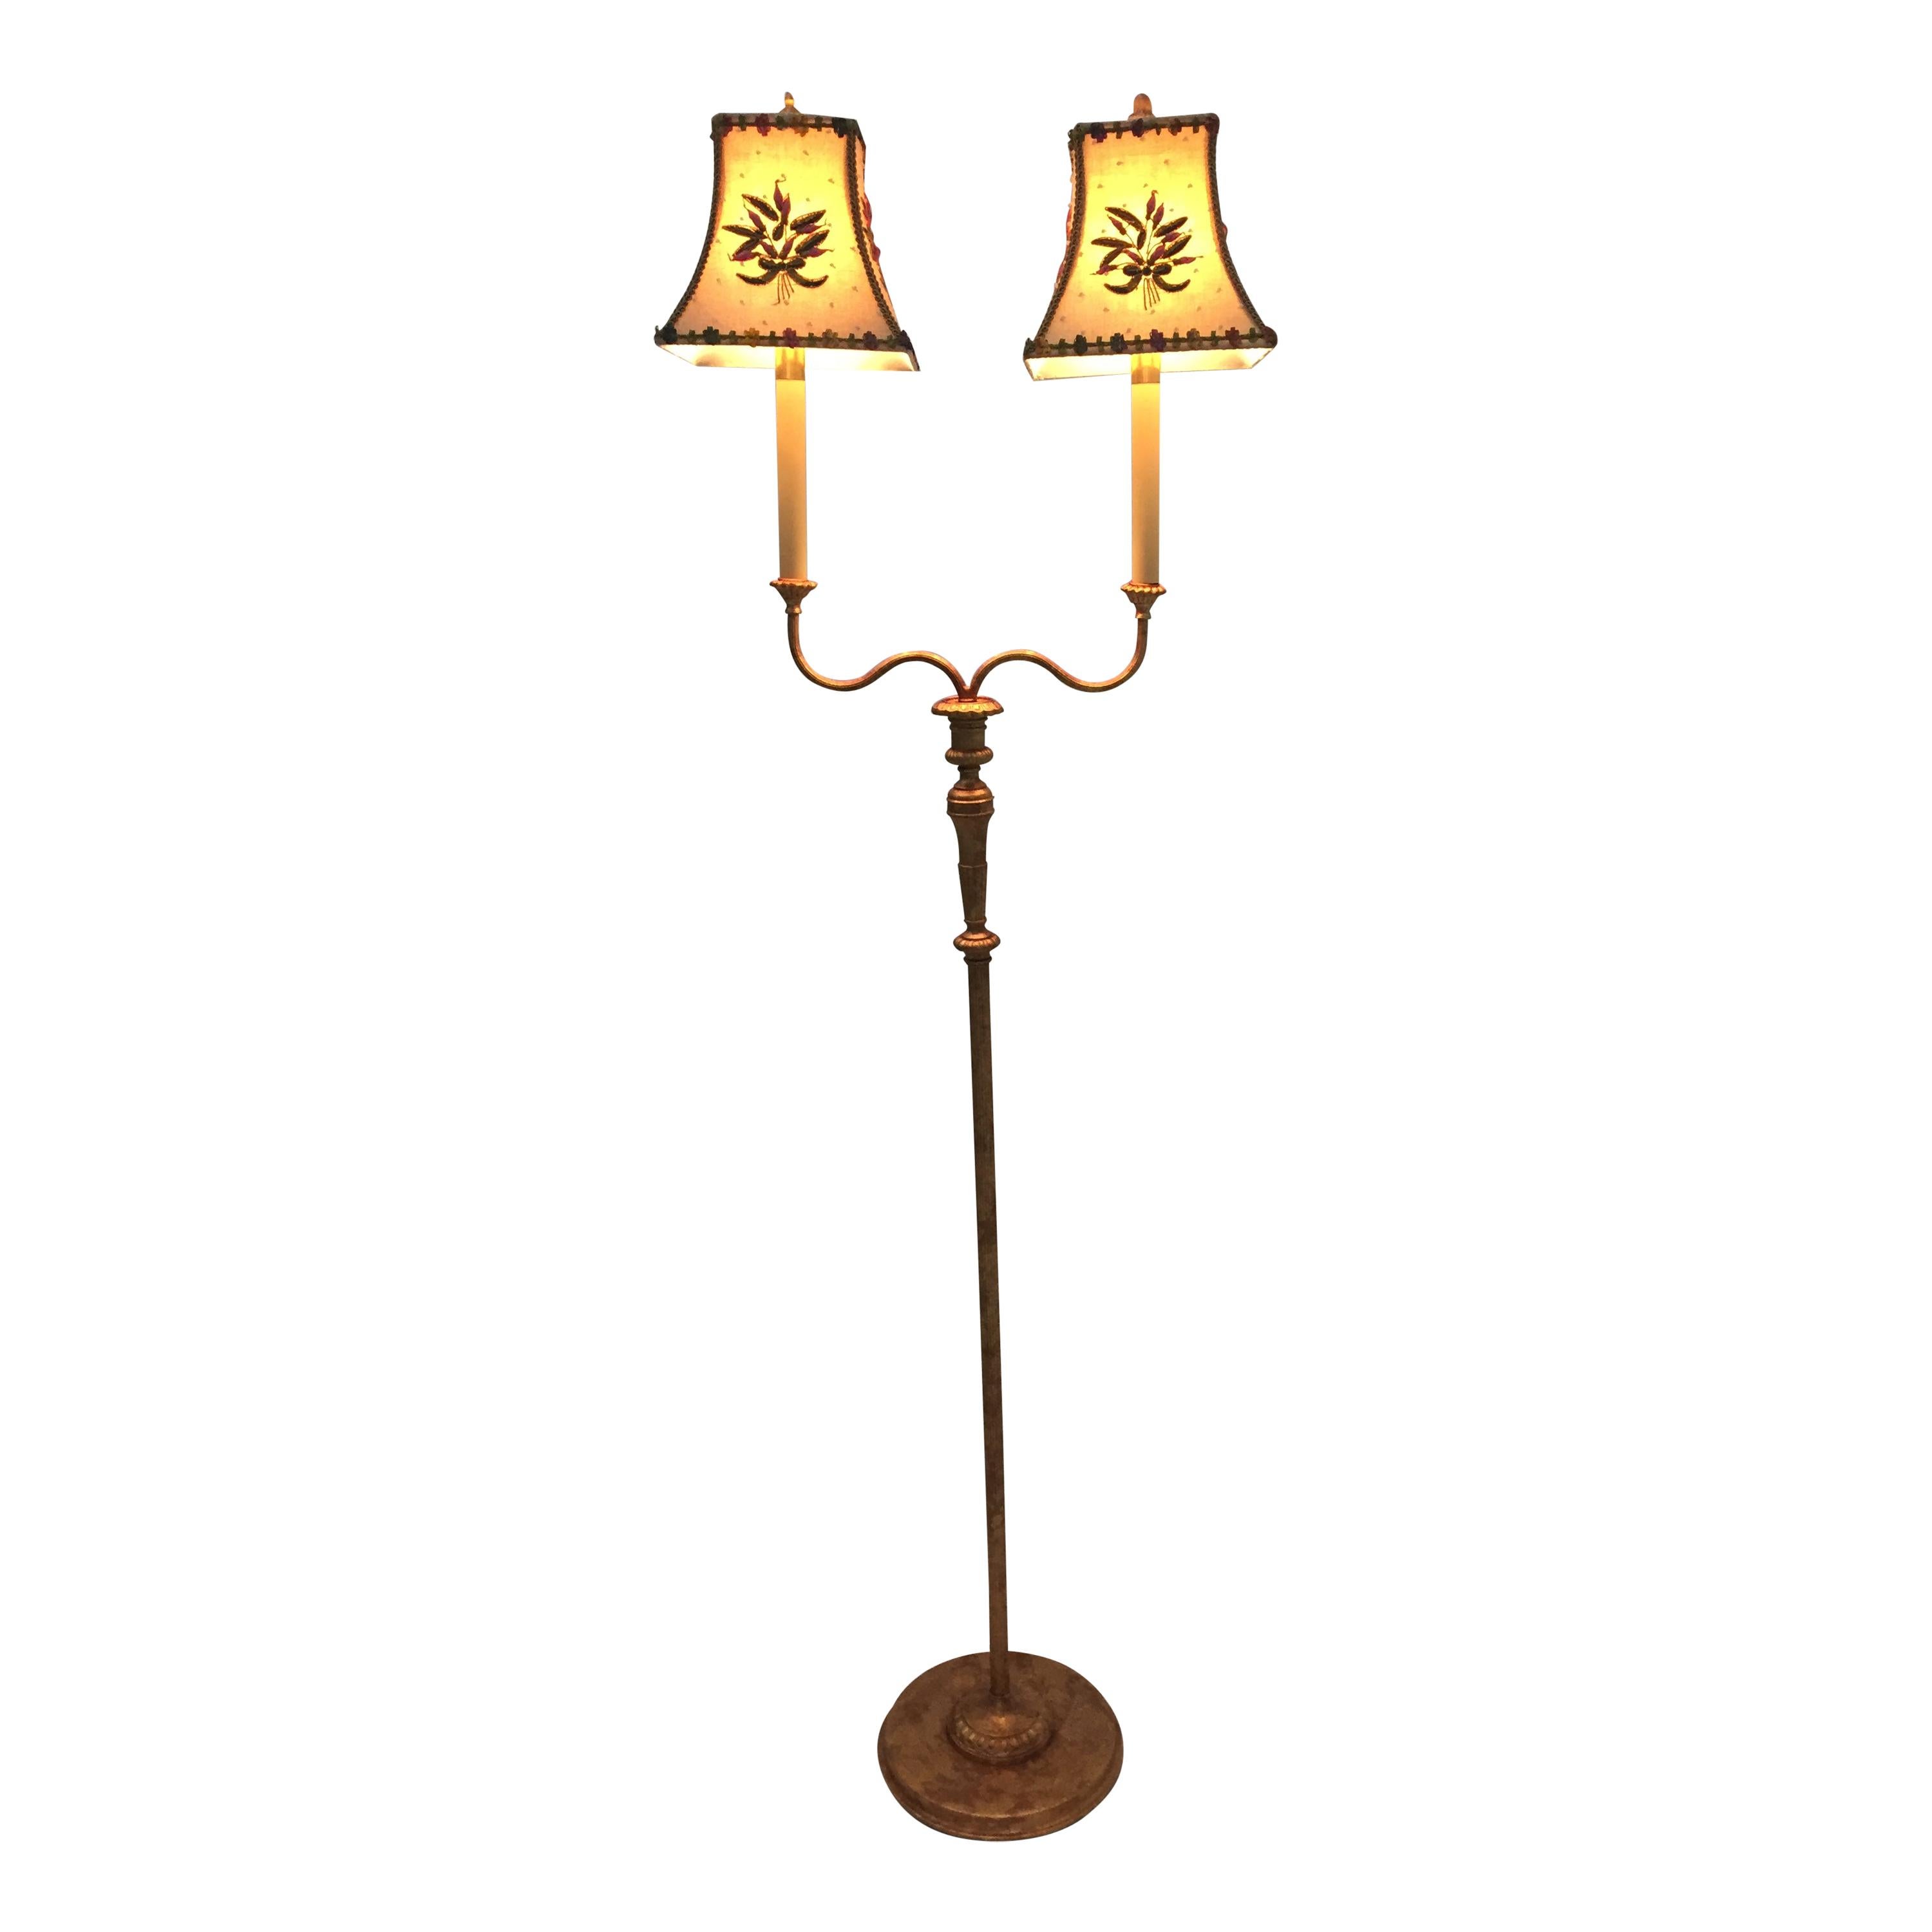 Very Pretty Two-Arm Gilt Metal Floor Lamp with Hand Embroidered Shades